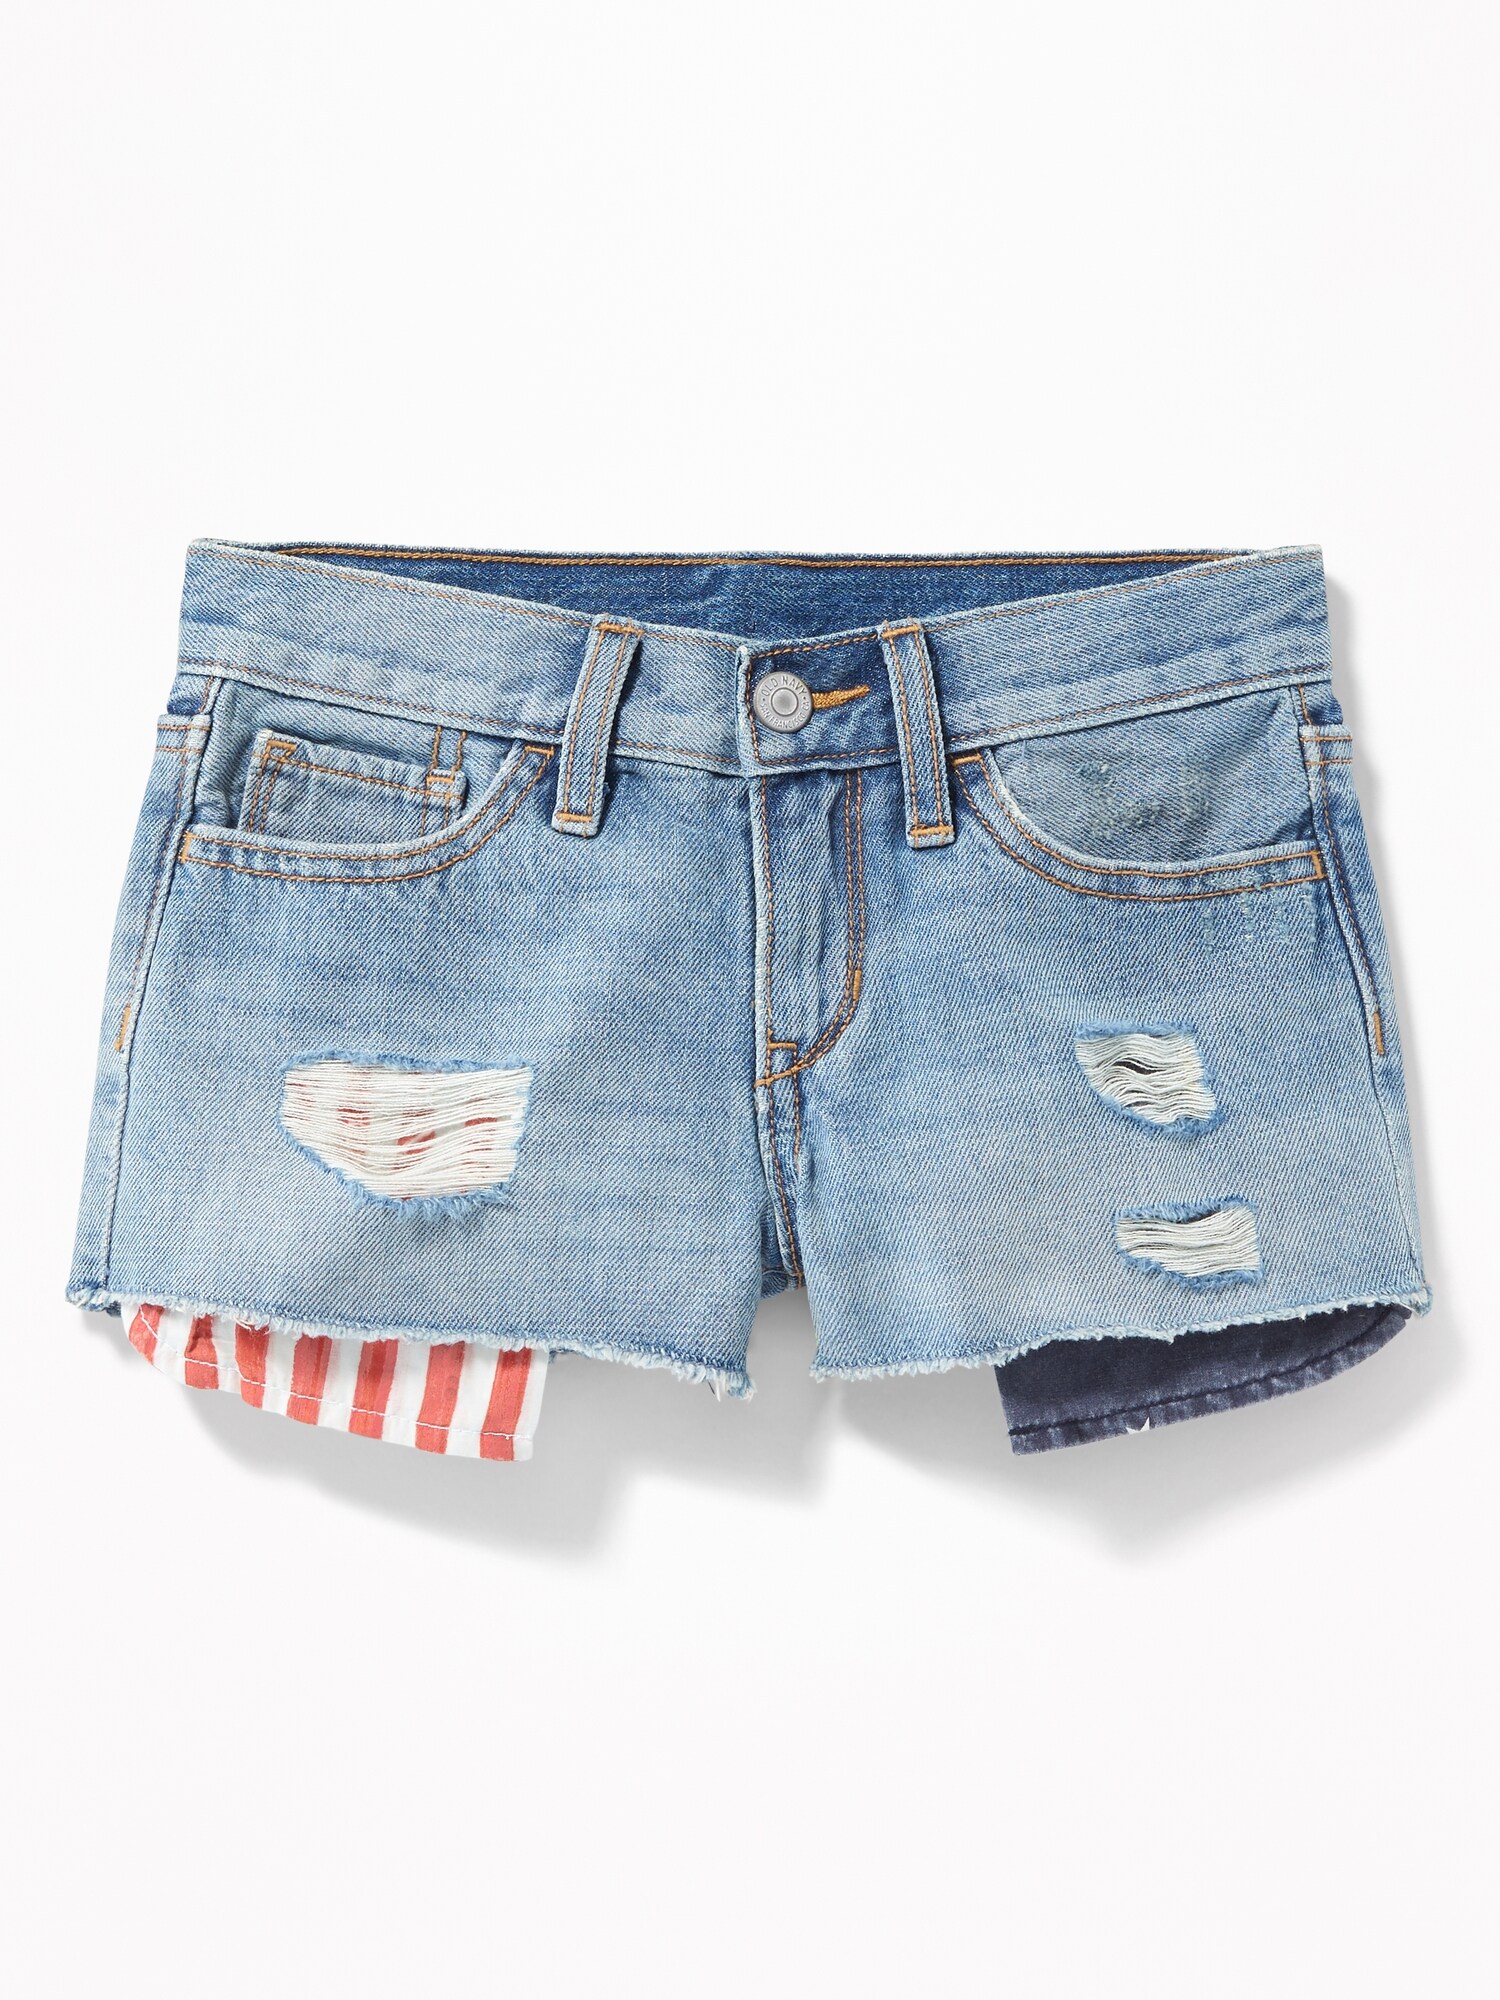 Americana Exposed Pocket Distressed Denim Cut-Offs for Girls | Old Navy